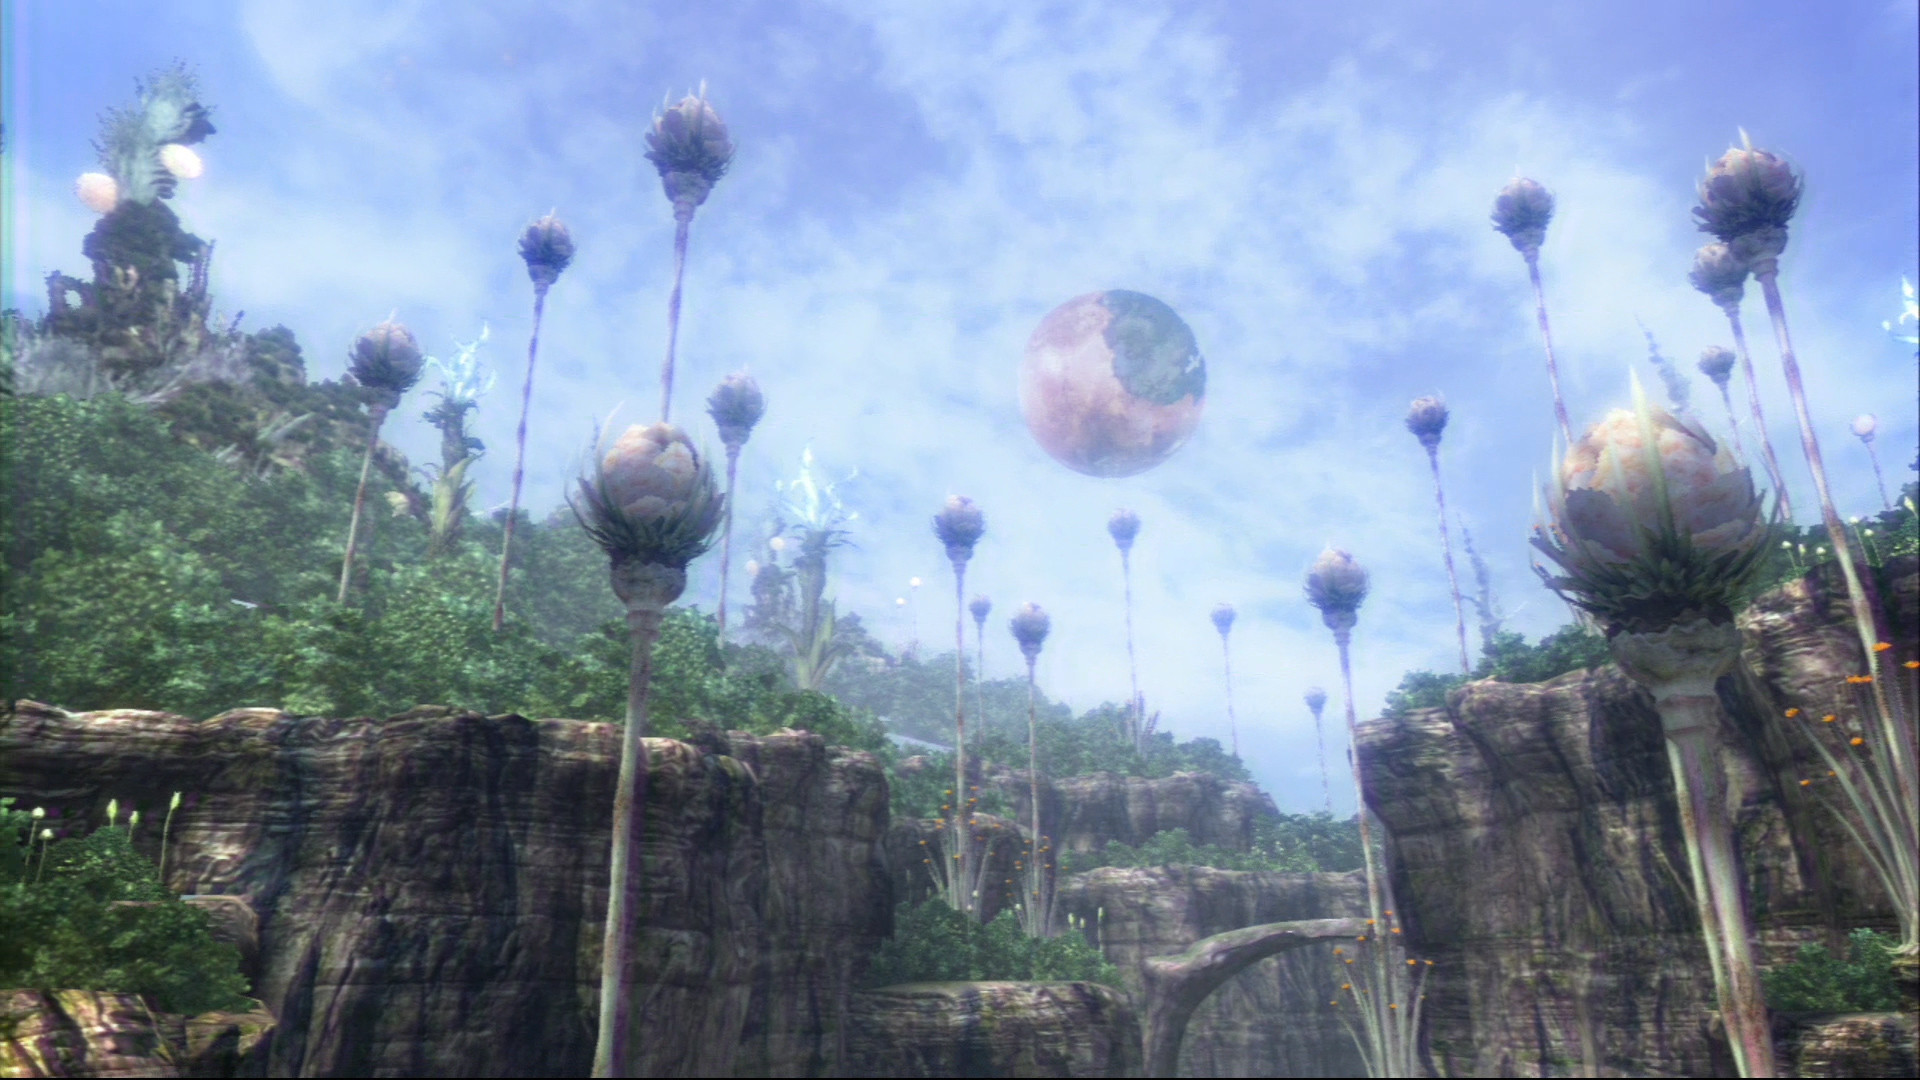 1920x1080 Tree, Final Fantasy, Tourism, Tourist Attraction, Final Fantasy Xiii  Wallpaper in 